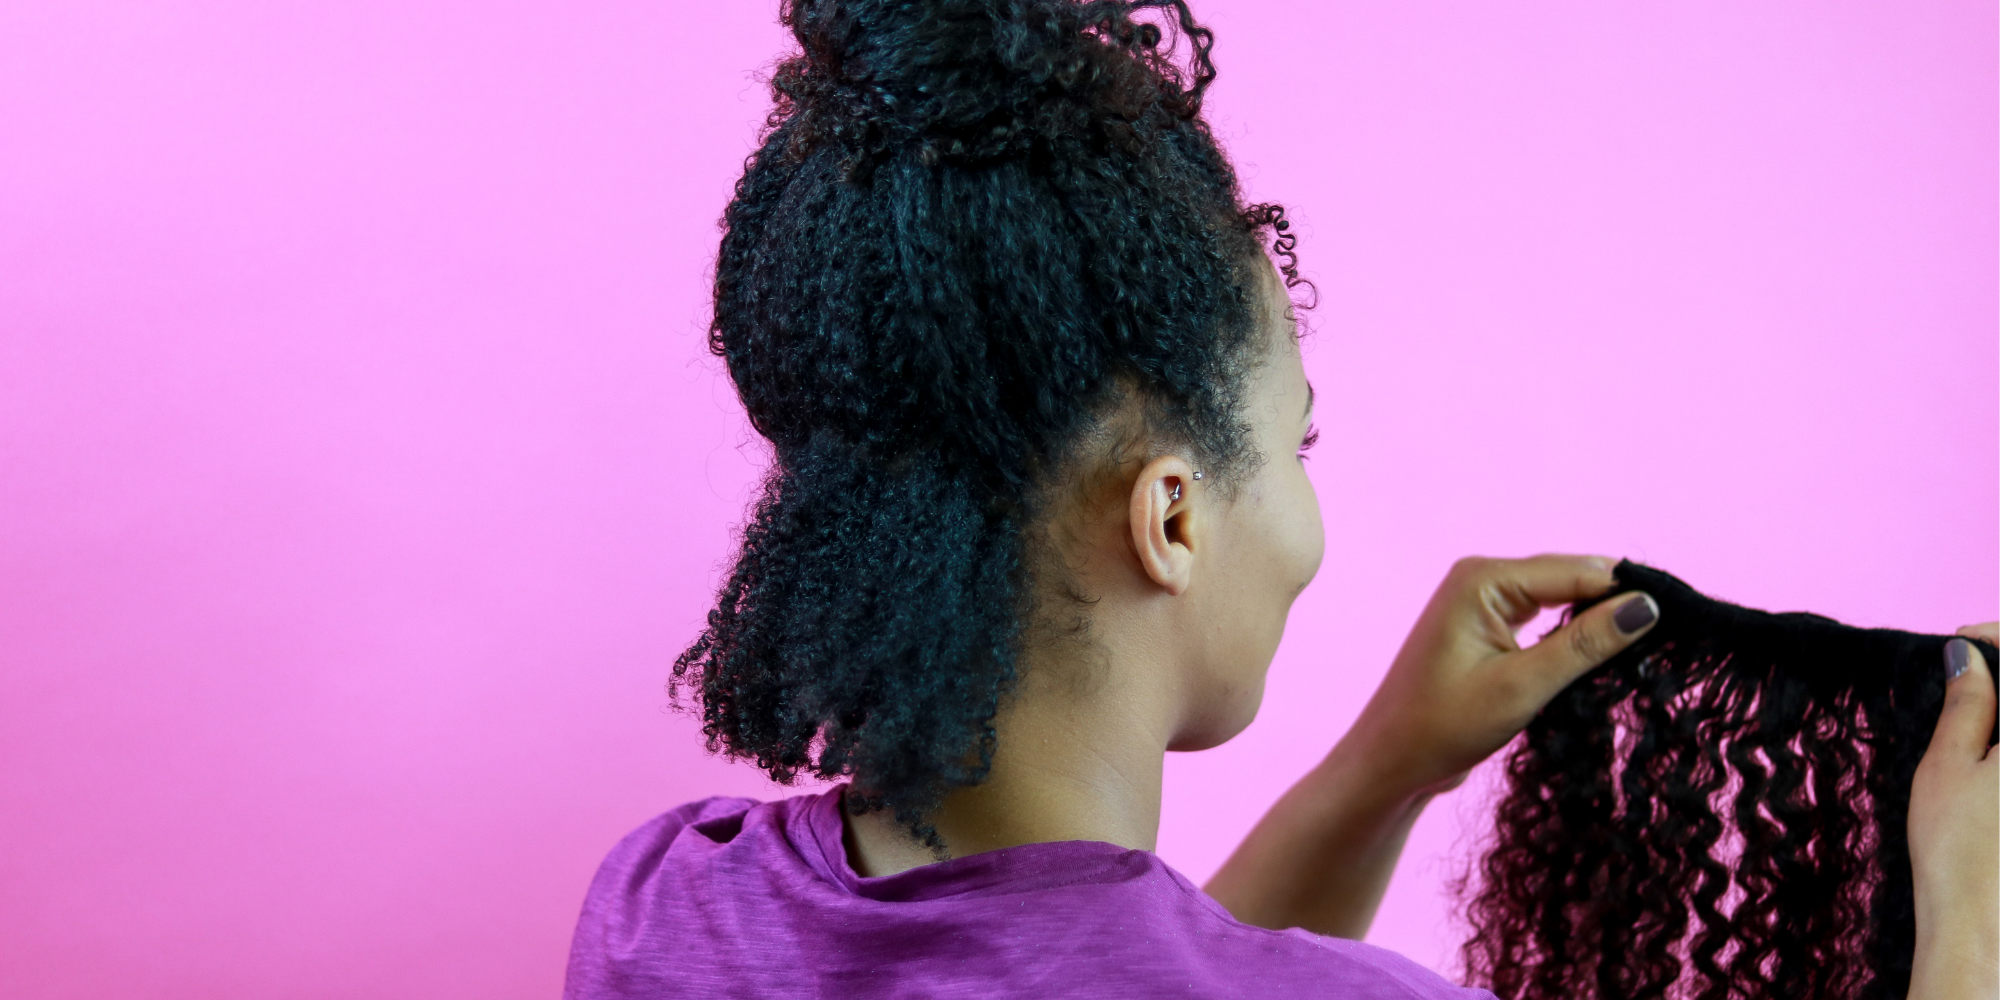 How To Choose The Right Amount Of KinkyCurlyYaki Clip-Ins